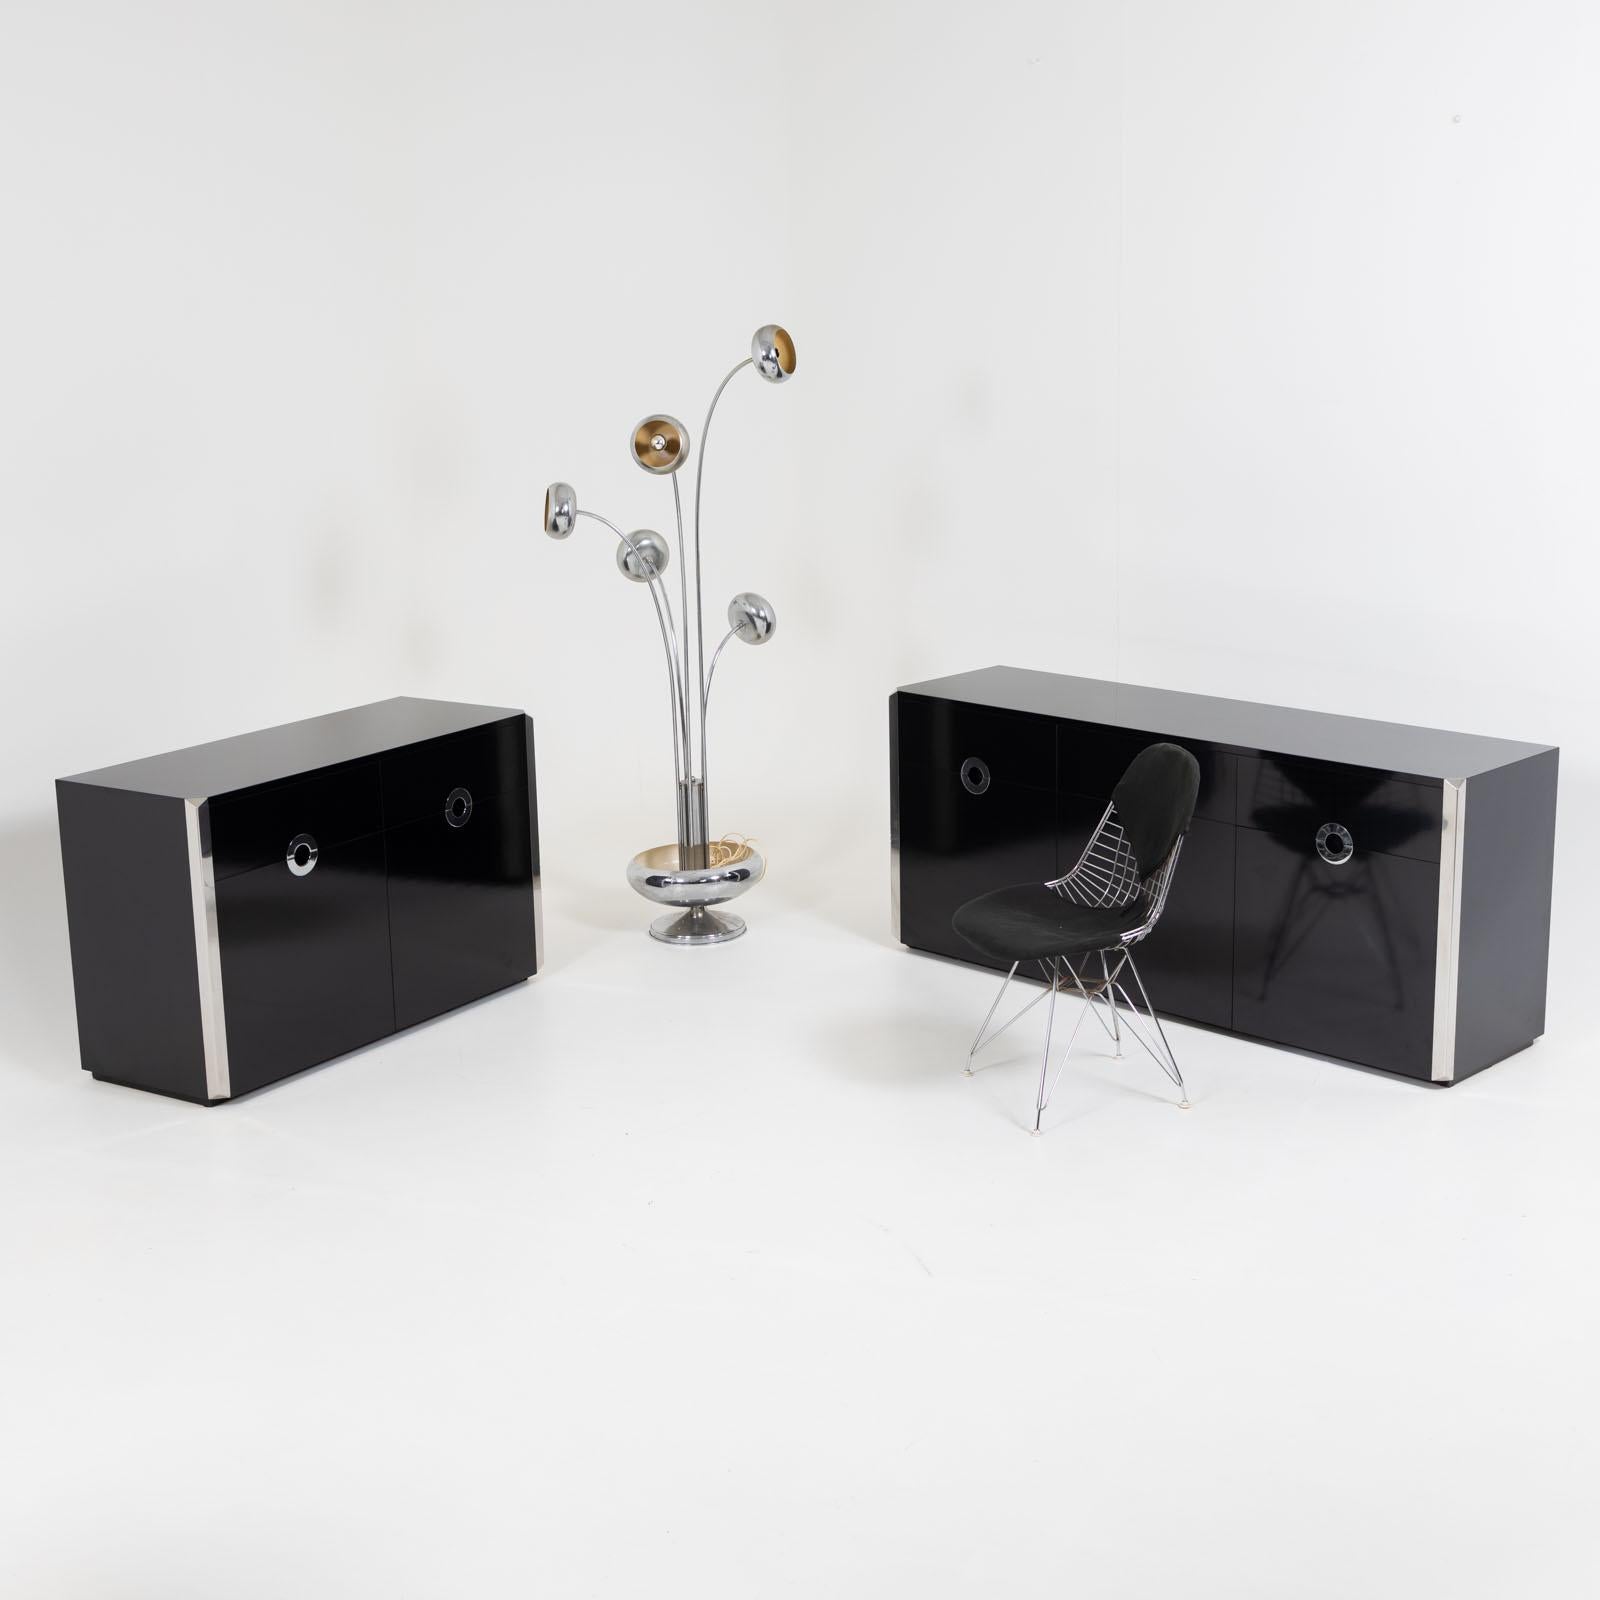 Two black sideboards by Willy Rizzo in two- and three-door versions with the characteristic contrasting edges in stainless steel and round handles. The middle door of the three-door version can be folded down. Dimensions of the smaller version: 76 x